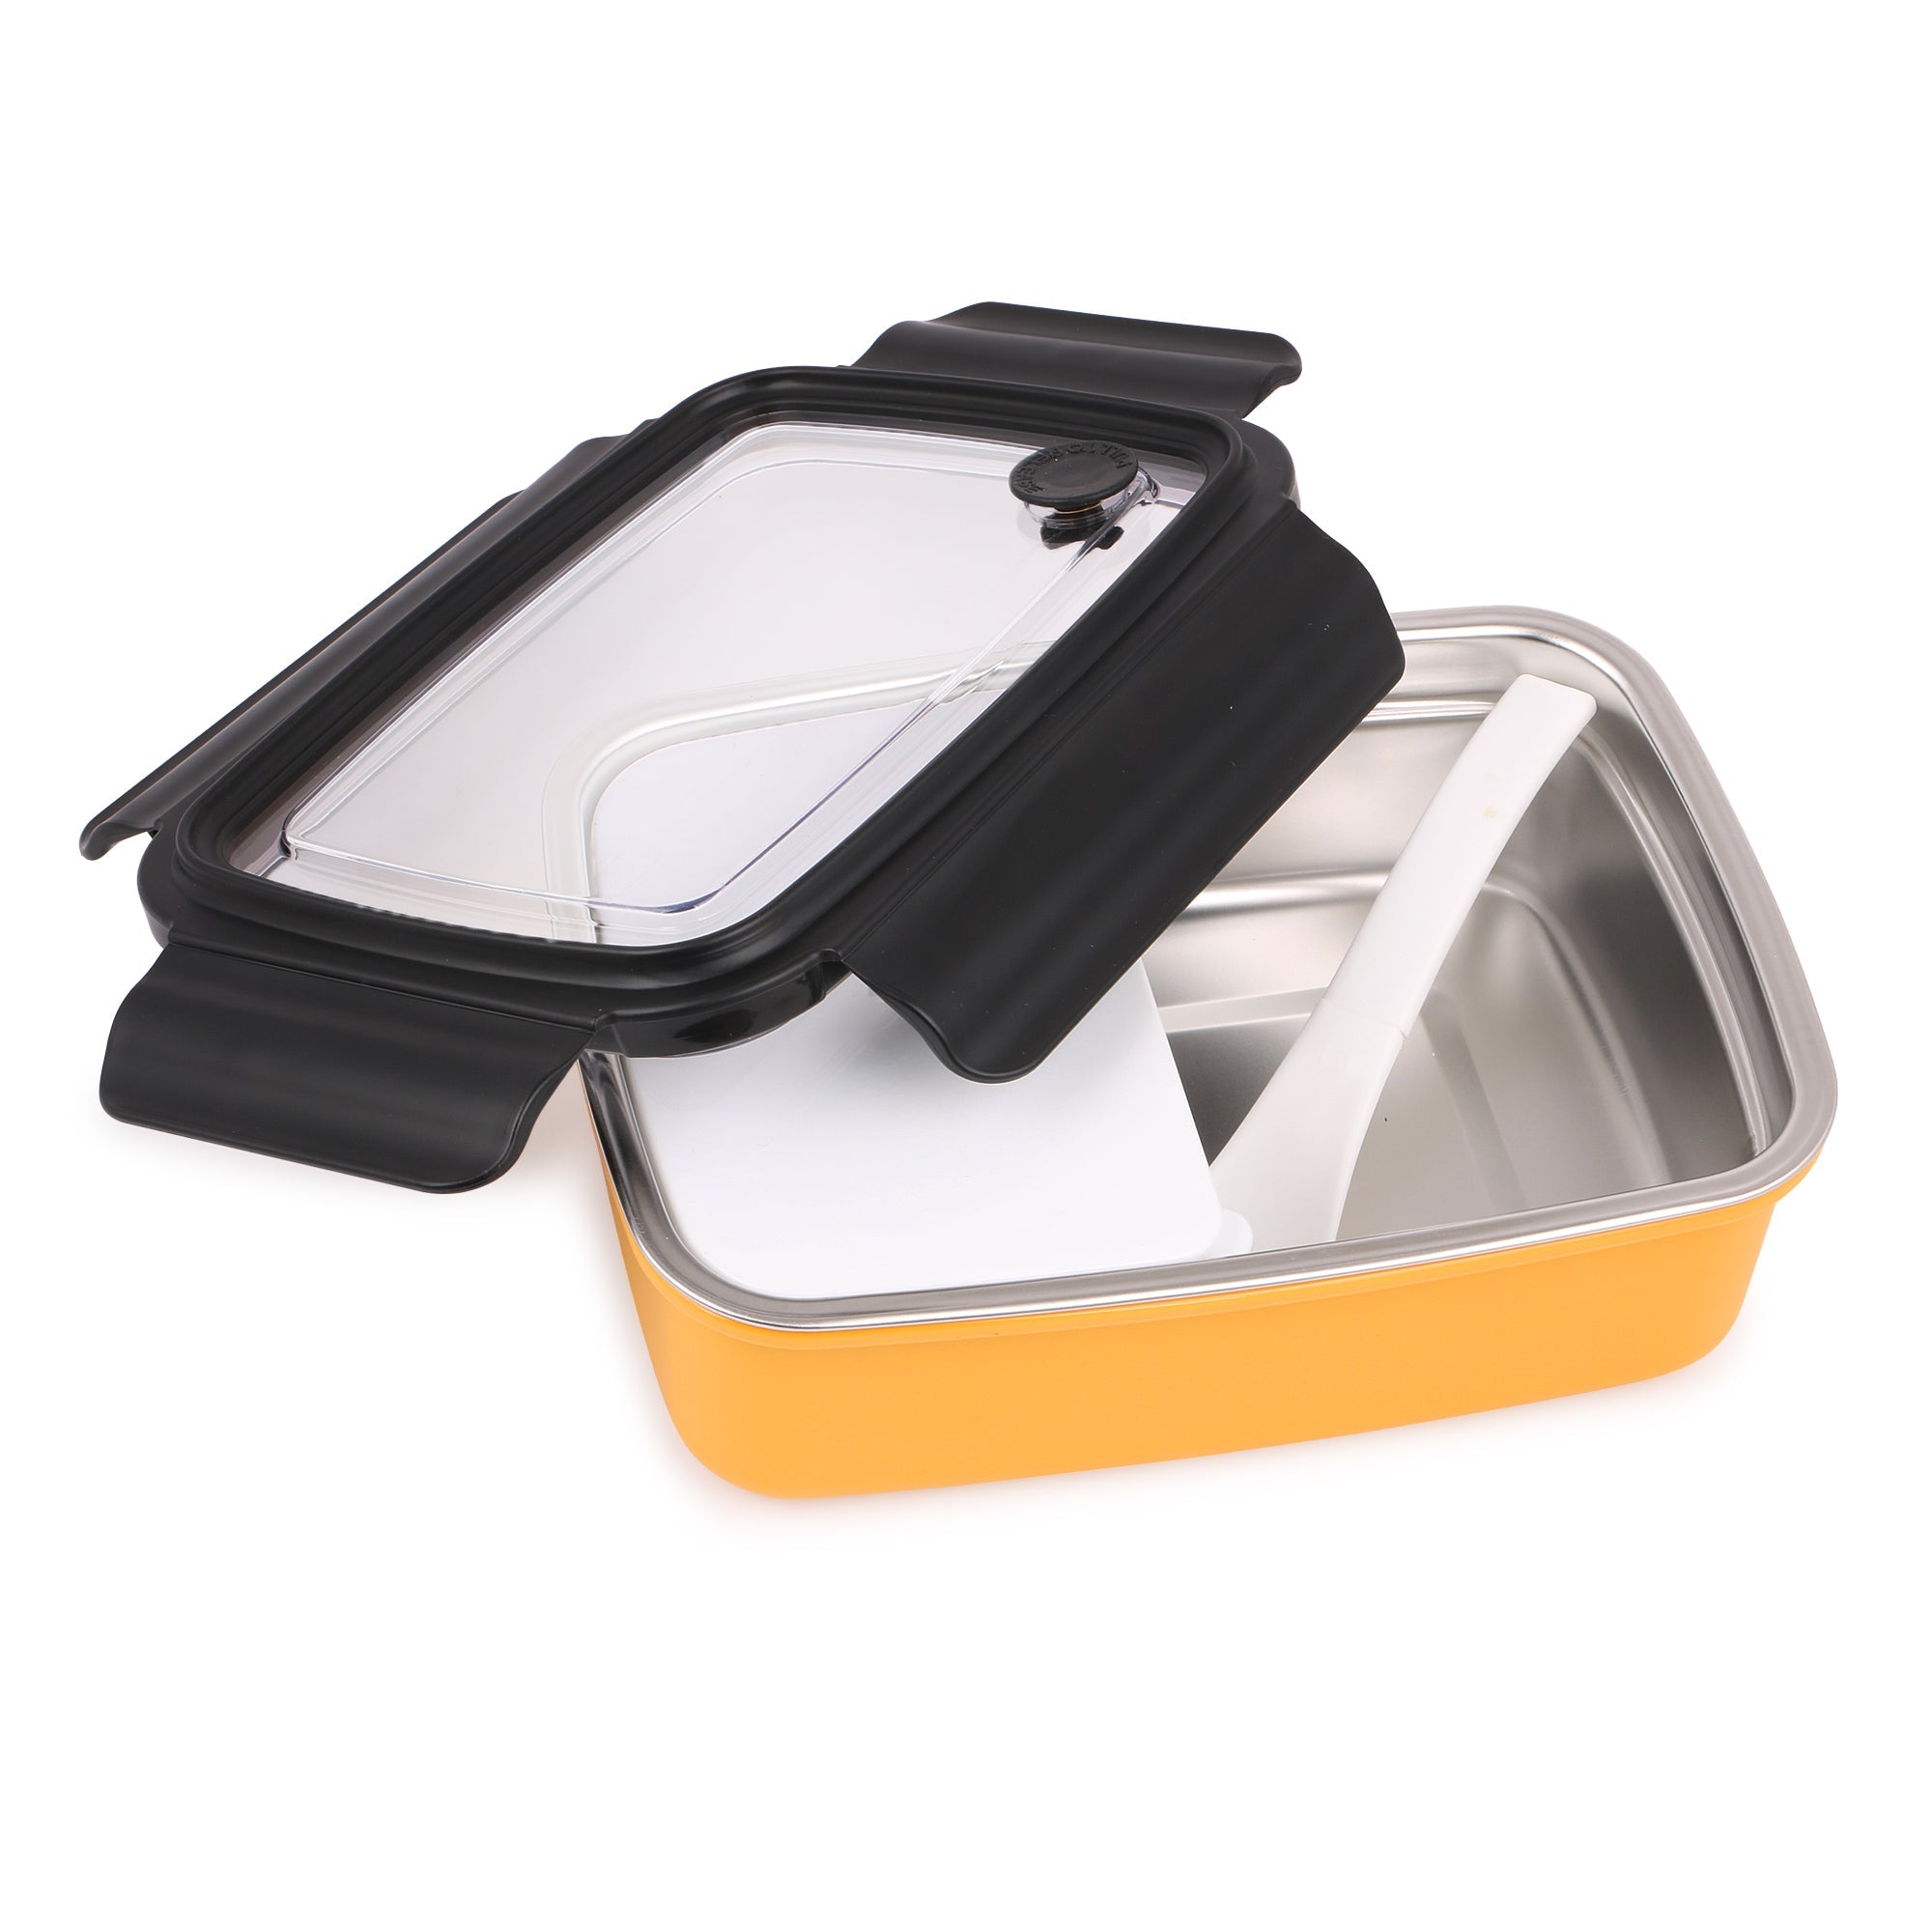 Stainless Steel insulated dual Color Kids Lunch Box 8001-800 ml